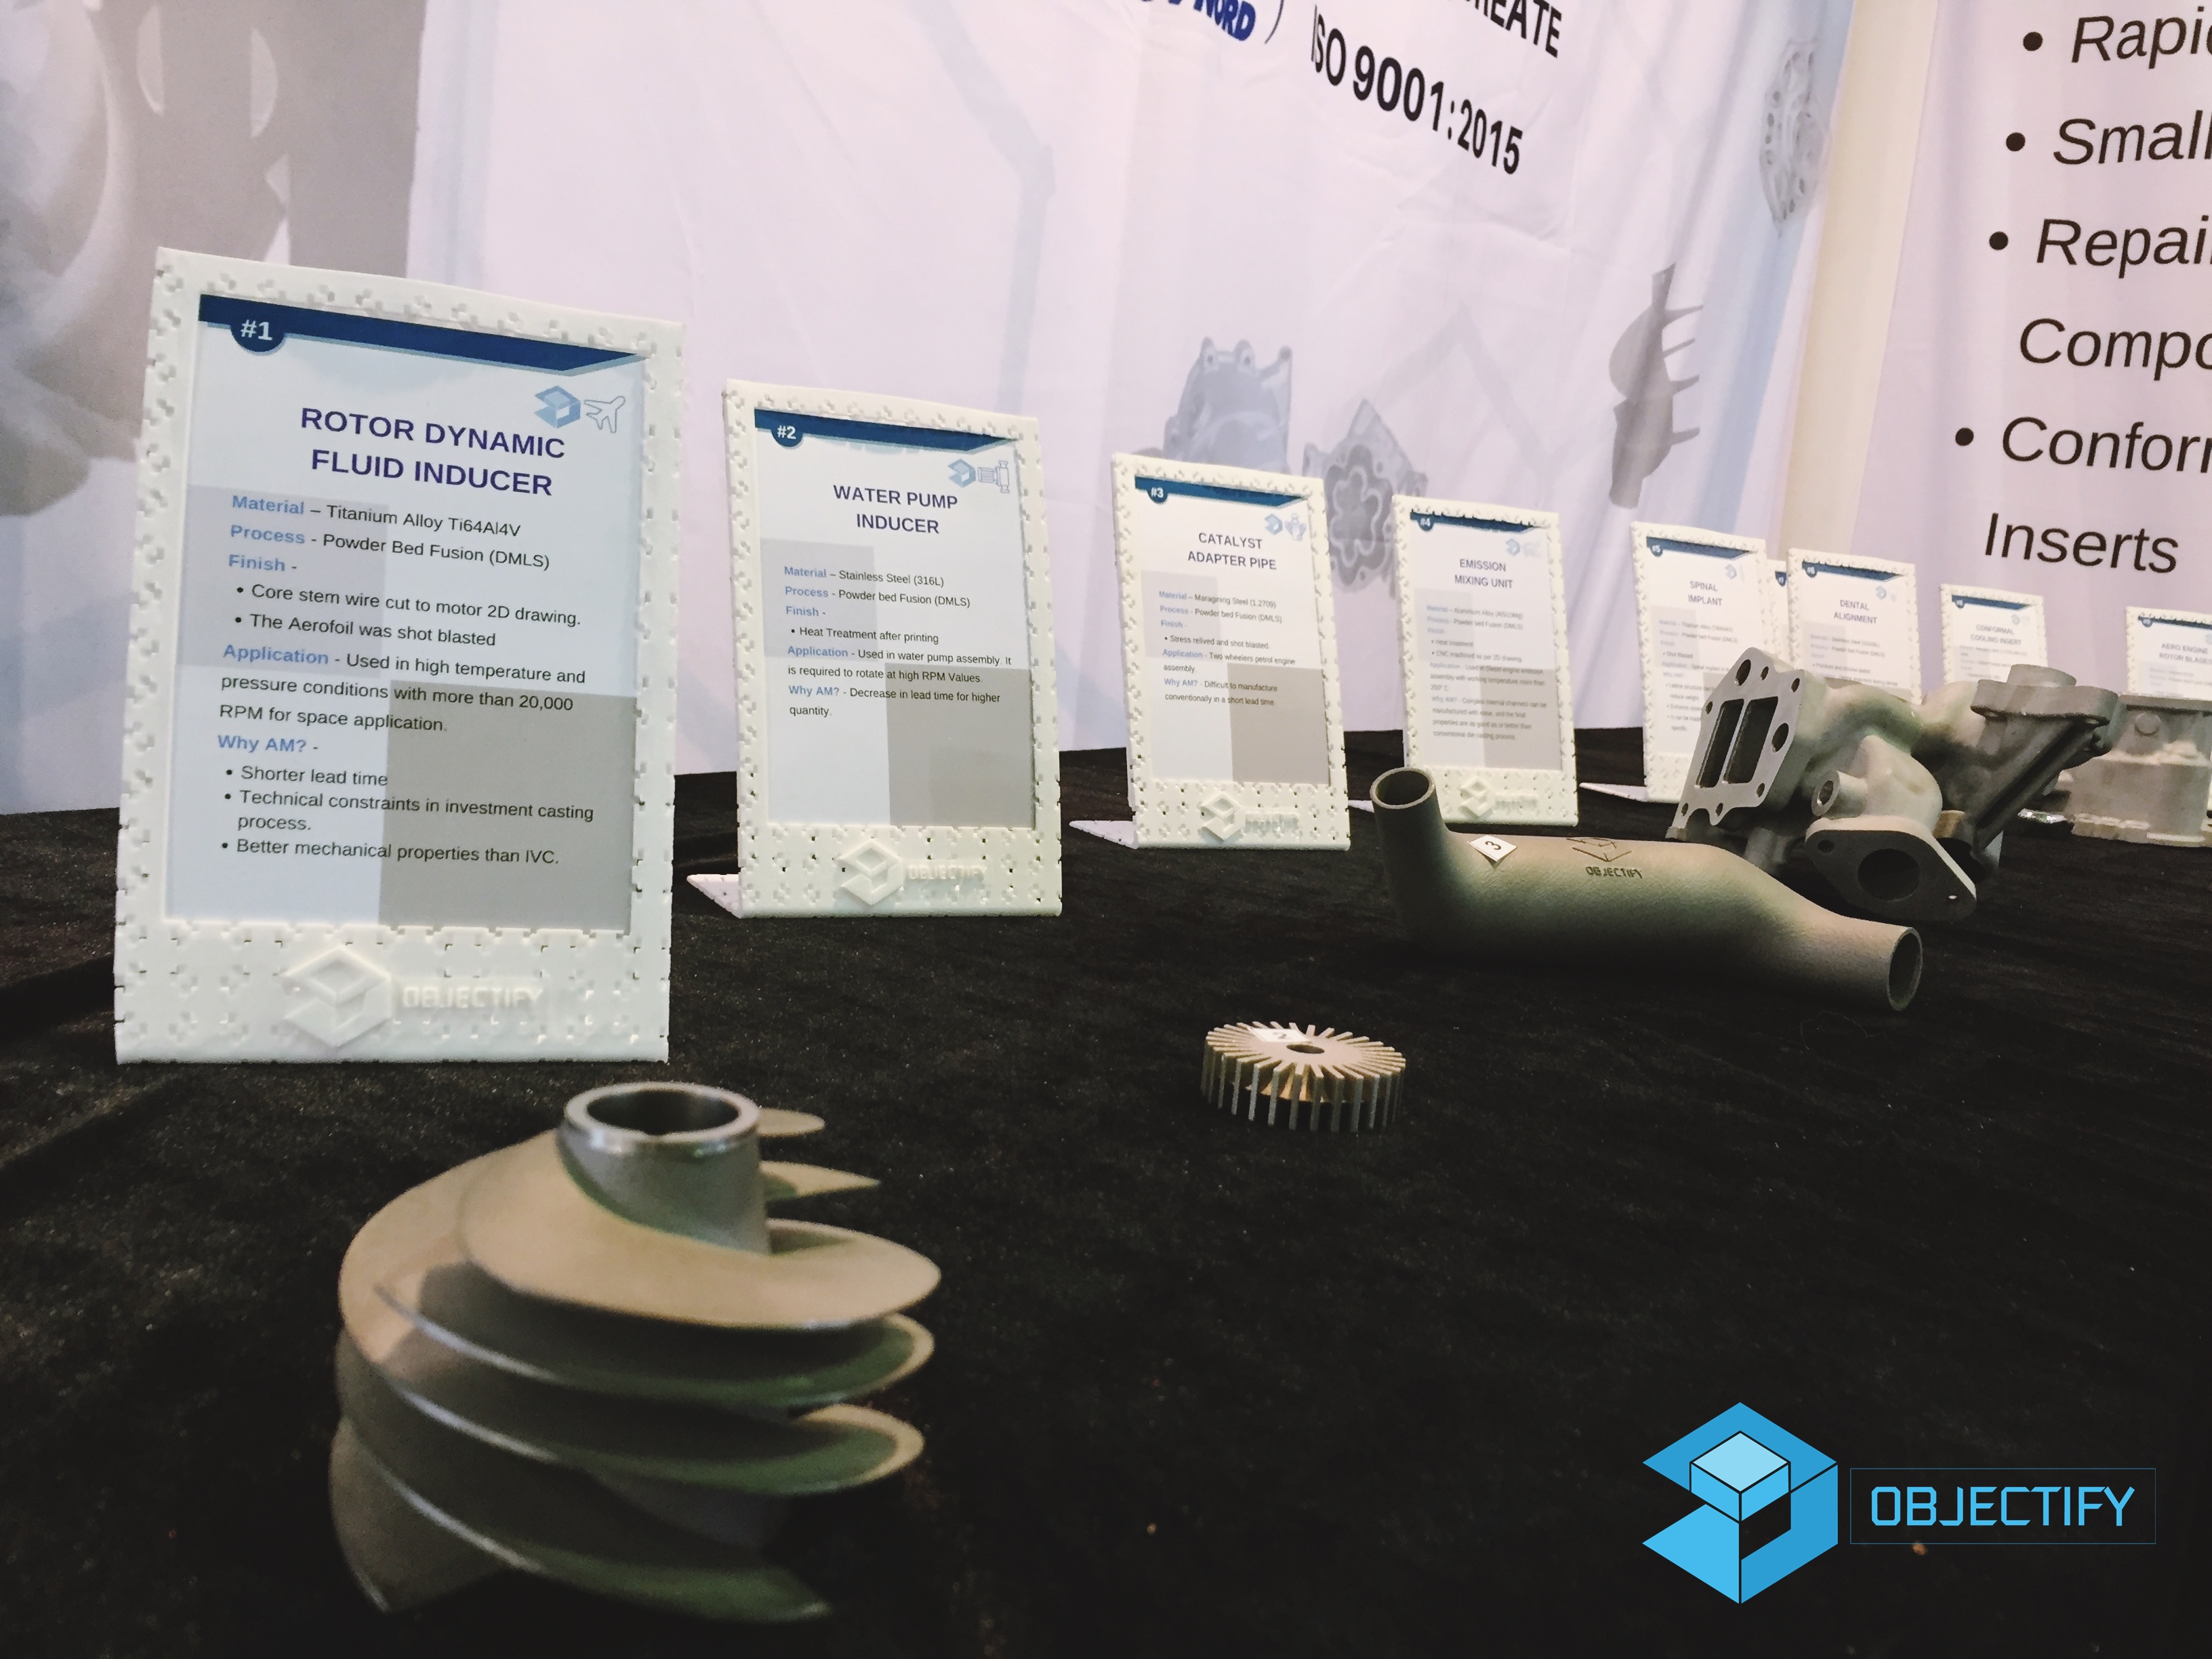 Objectify Technologies participates in Formnext 2019, showcases AM solutions